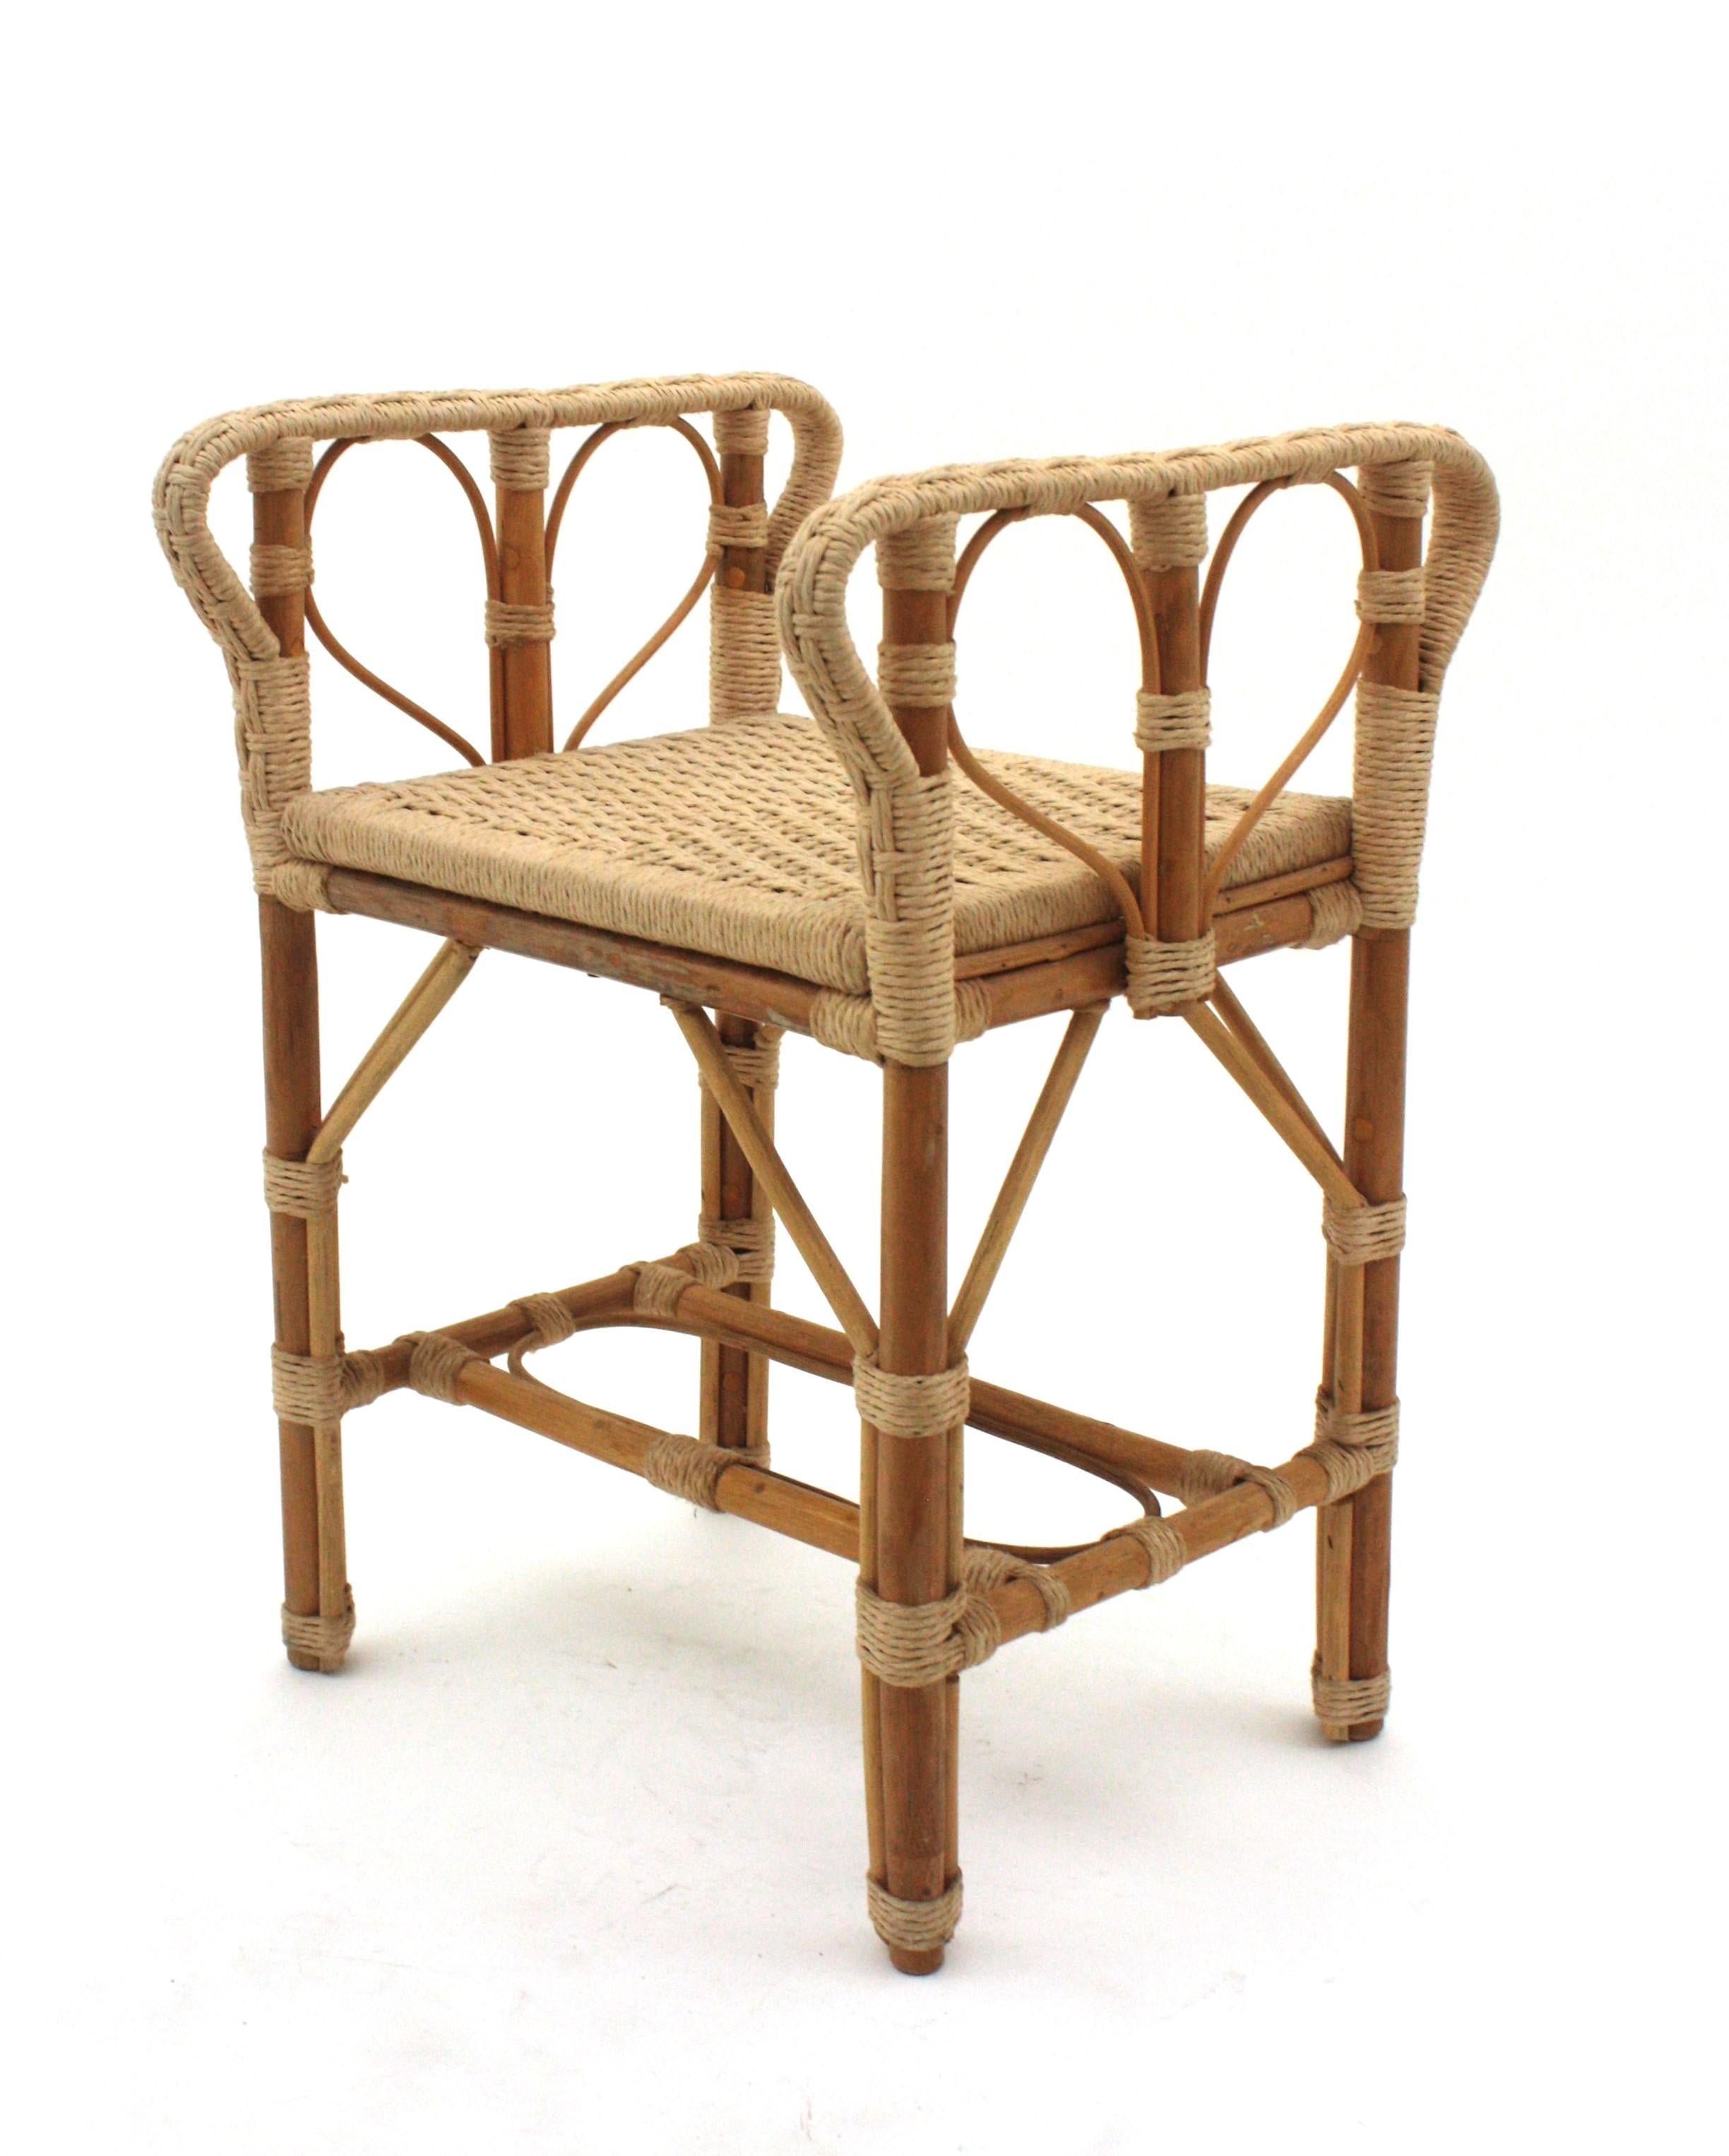 20th Century Hand Woven Rope Rattan Stool or Side Table,  Spain, 1960s For Sale